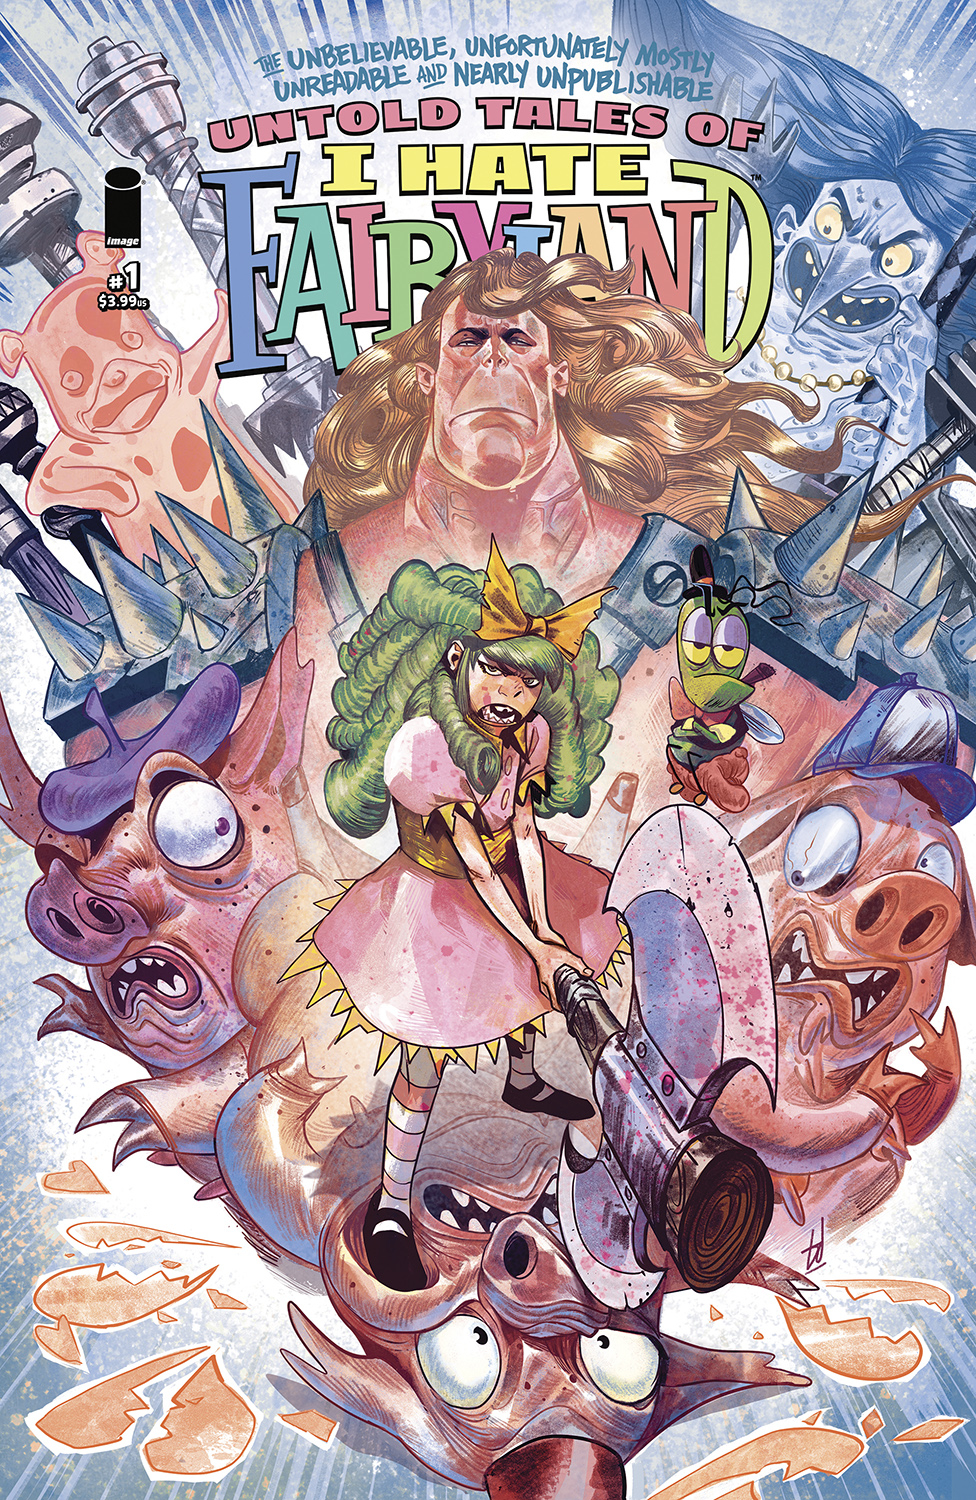 Unbelievable Unfortunately Mostly Unreadable and Nearly Unpublishable Untold Tales of I Hate Fairyland #1 (Mature) (Of 5)